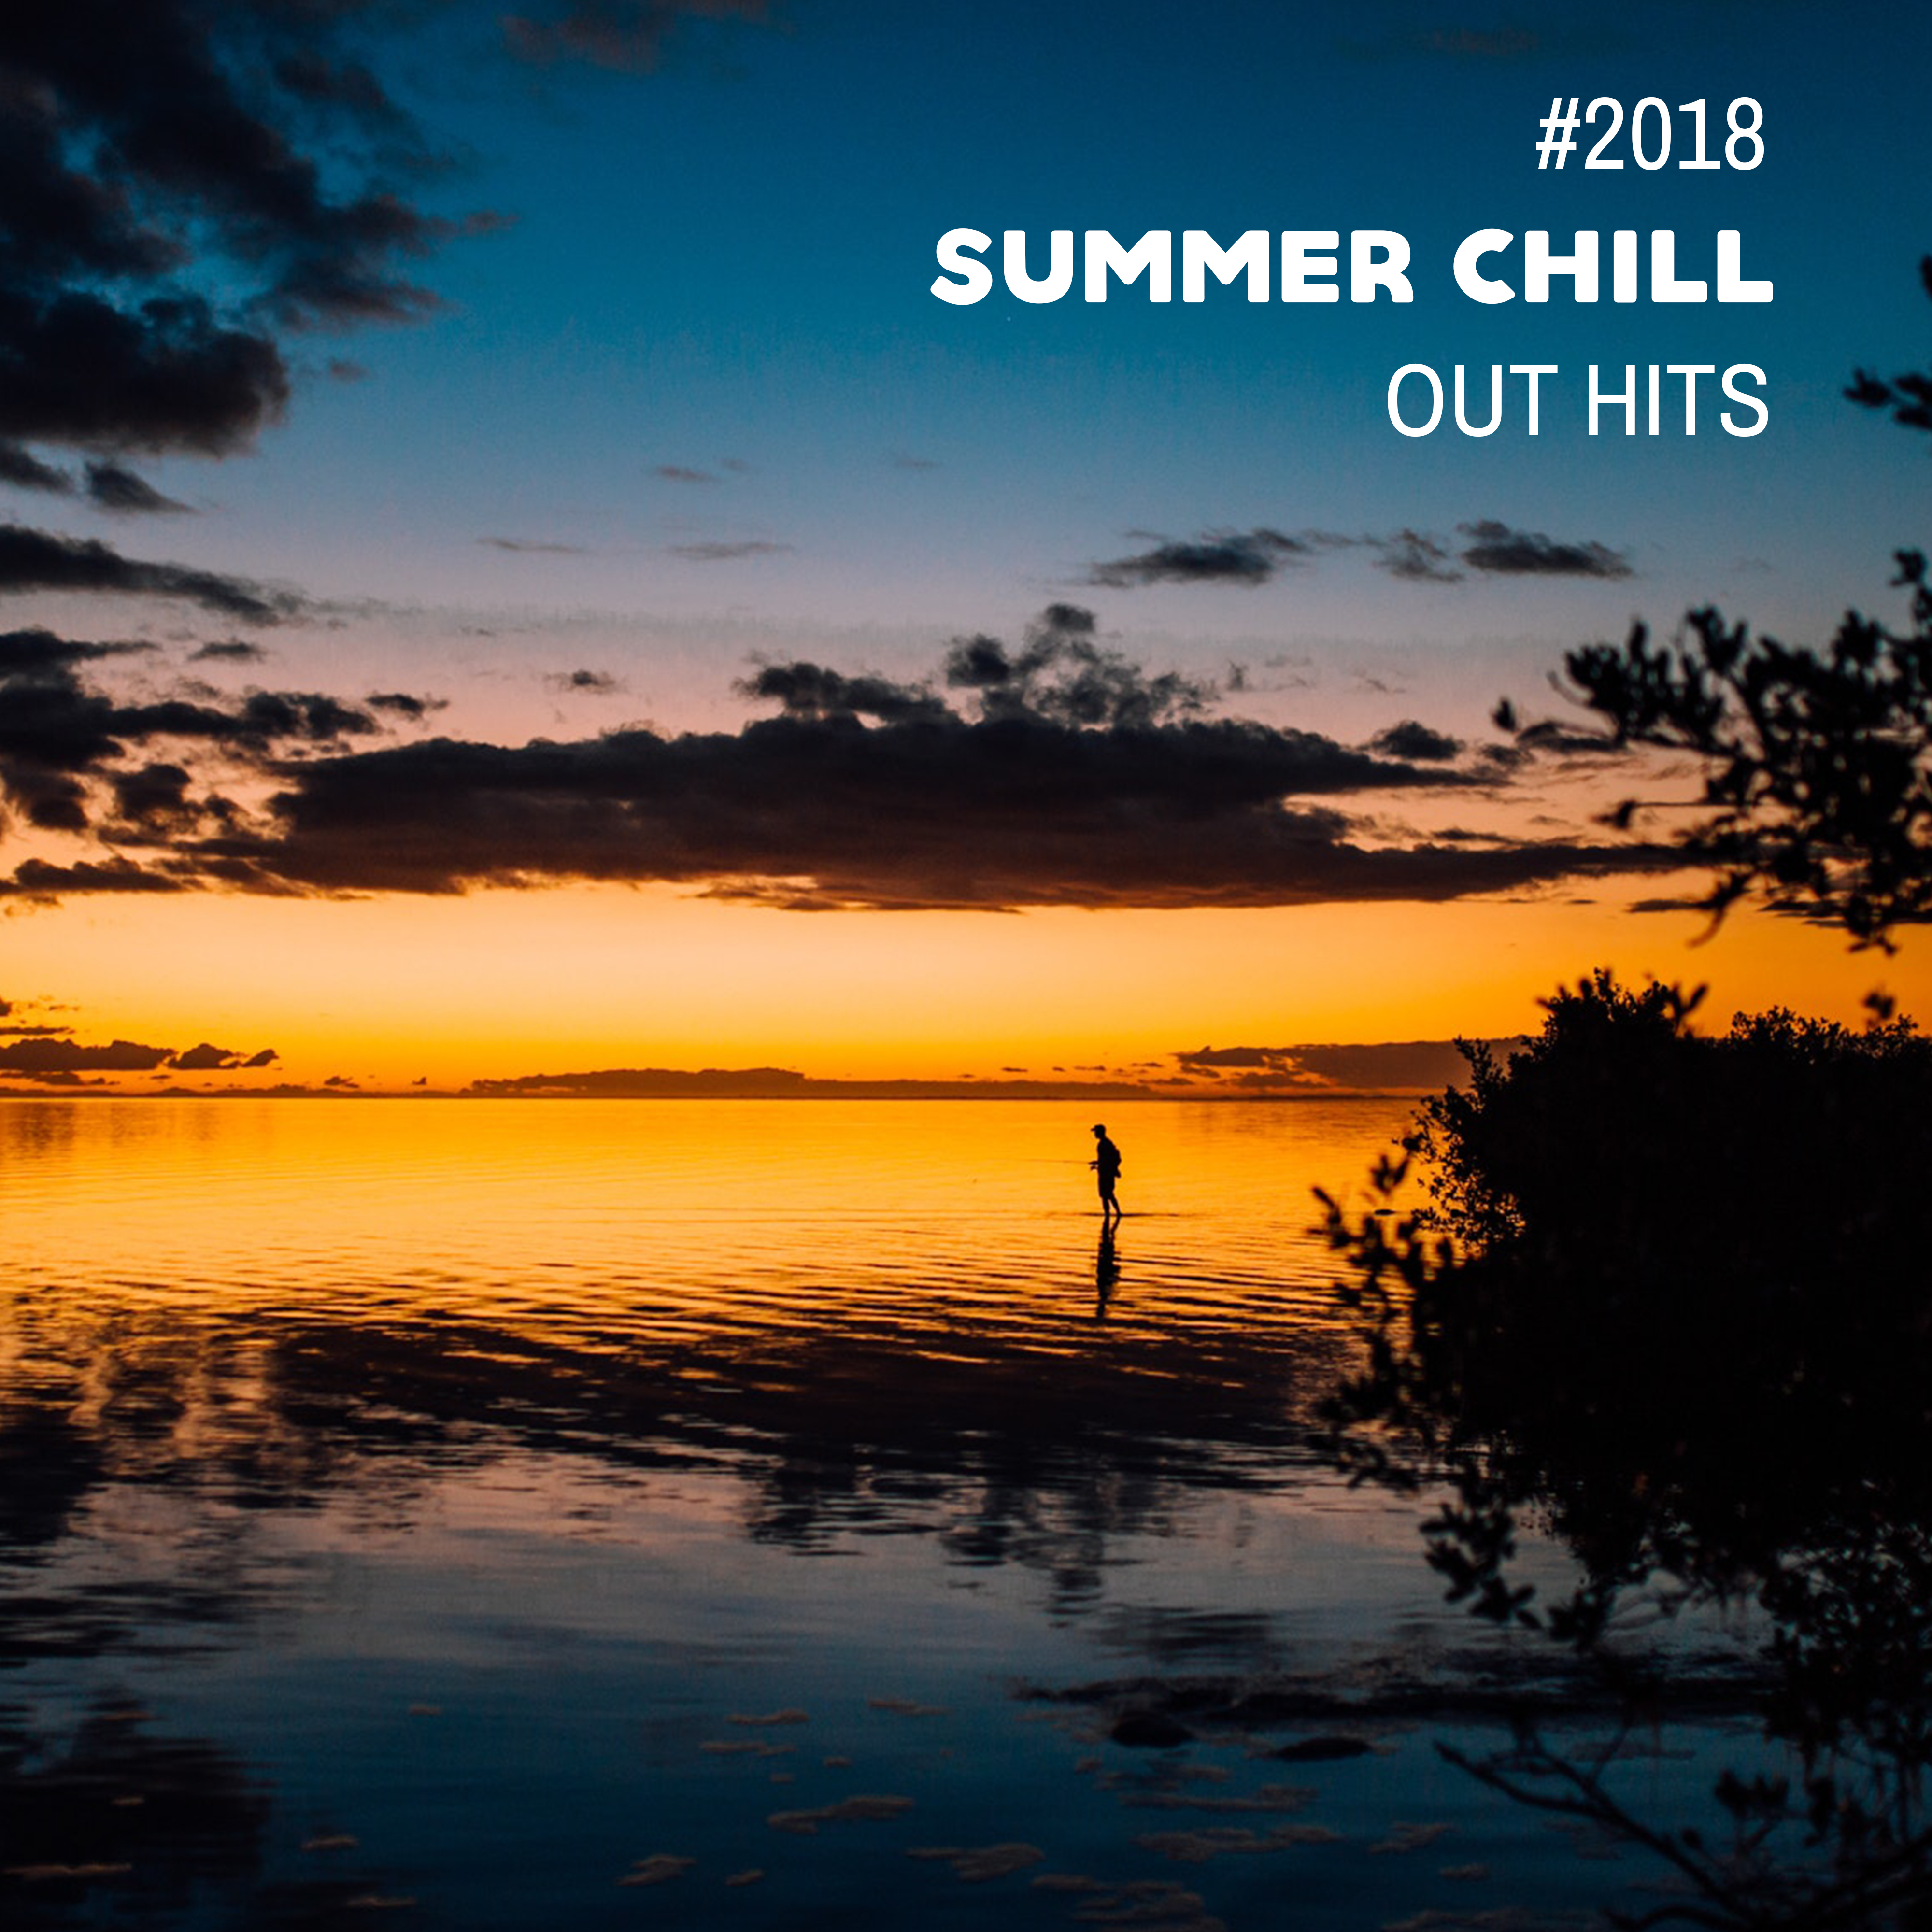 #2018 Summer Chill Out Hits